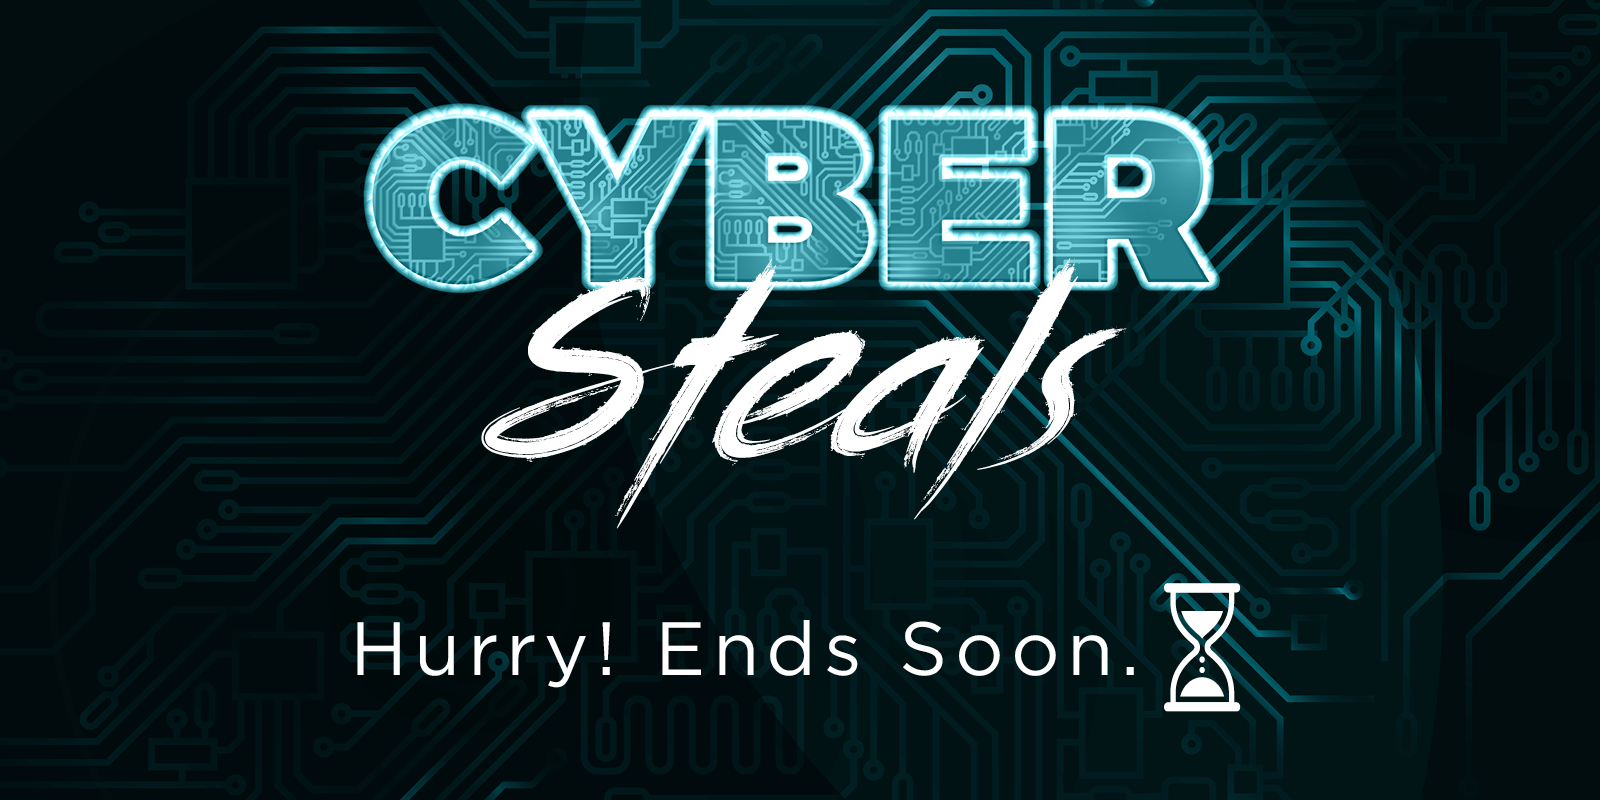 Cyber Steals - Hurry! Ends Soon.